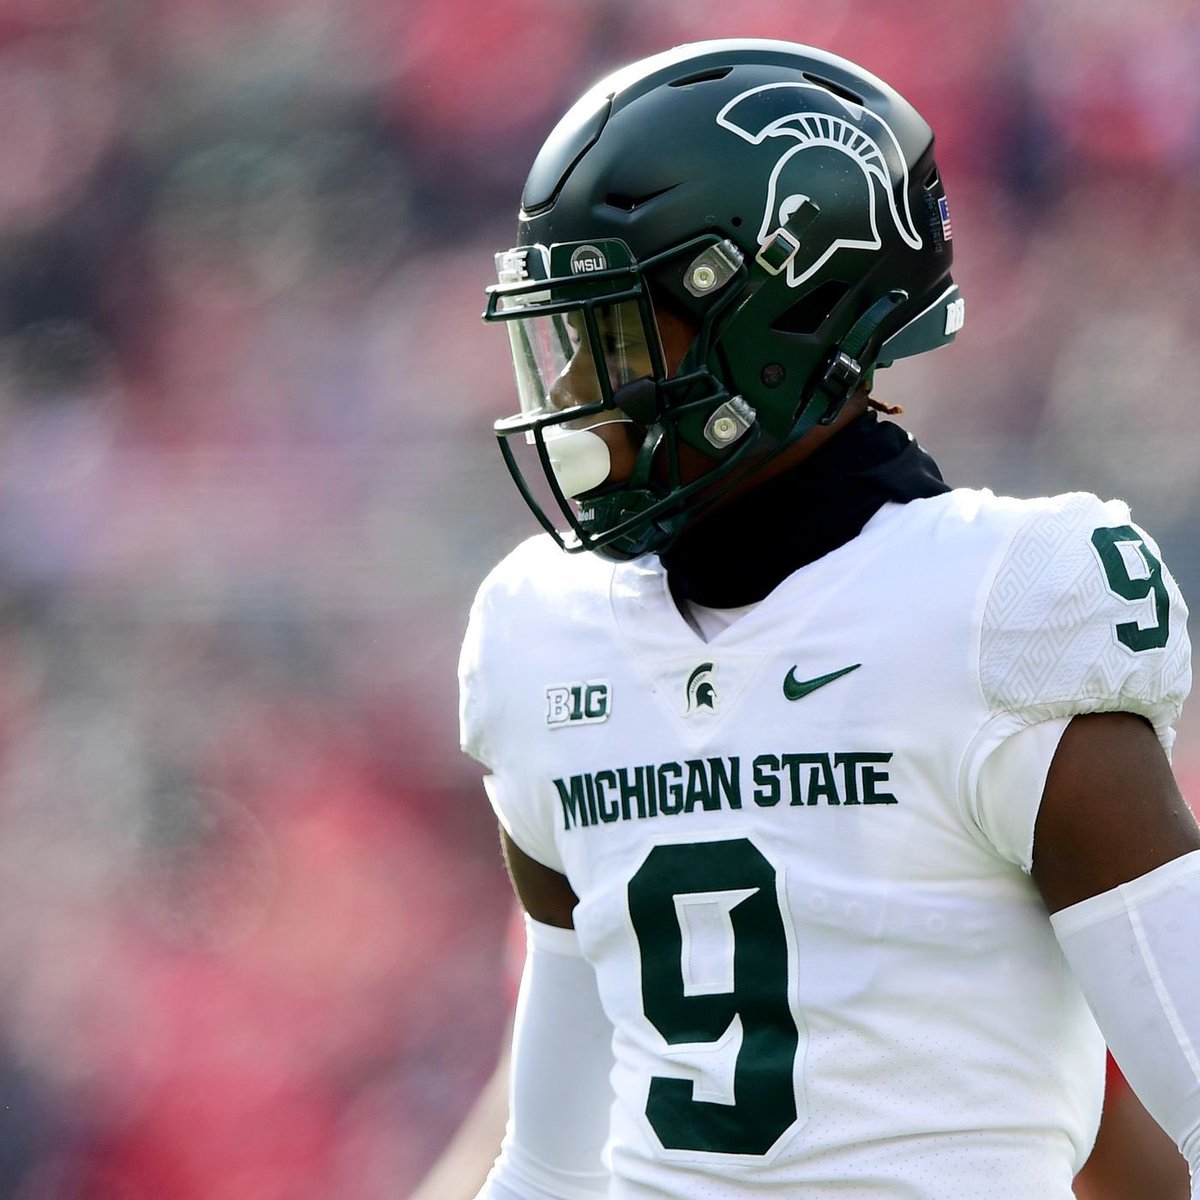 Extremely Blessed to receive a scholarship offer from Michigan State University!💚🤍🙏🏿#AGTG @Redskins32 @5manfree @ConroyWhyte @DBcoachadams @MohrRecruiting @Andrew_Ivins @JohnGarcia_Jr @TheCribSouthFLA @TheUCReport @DavidLake3